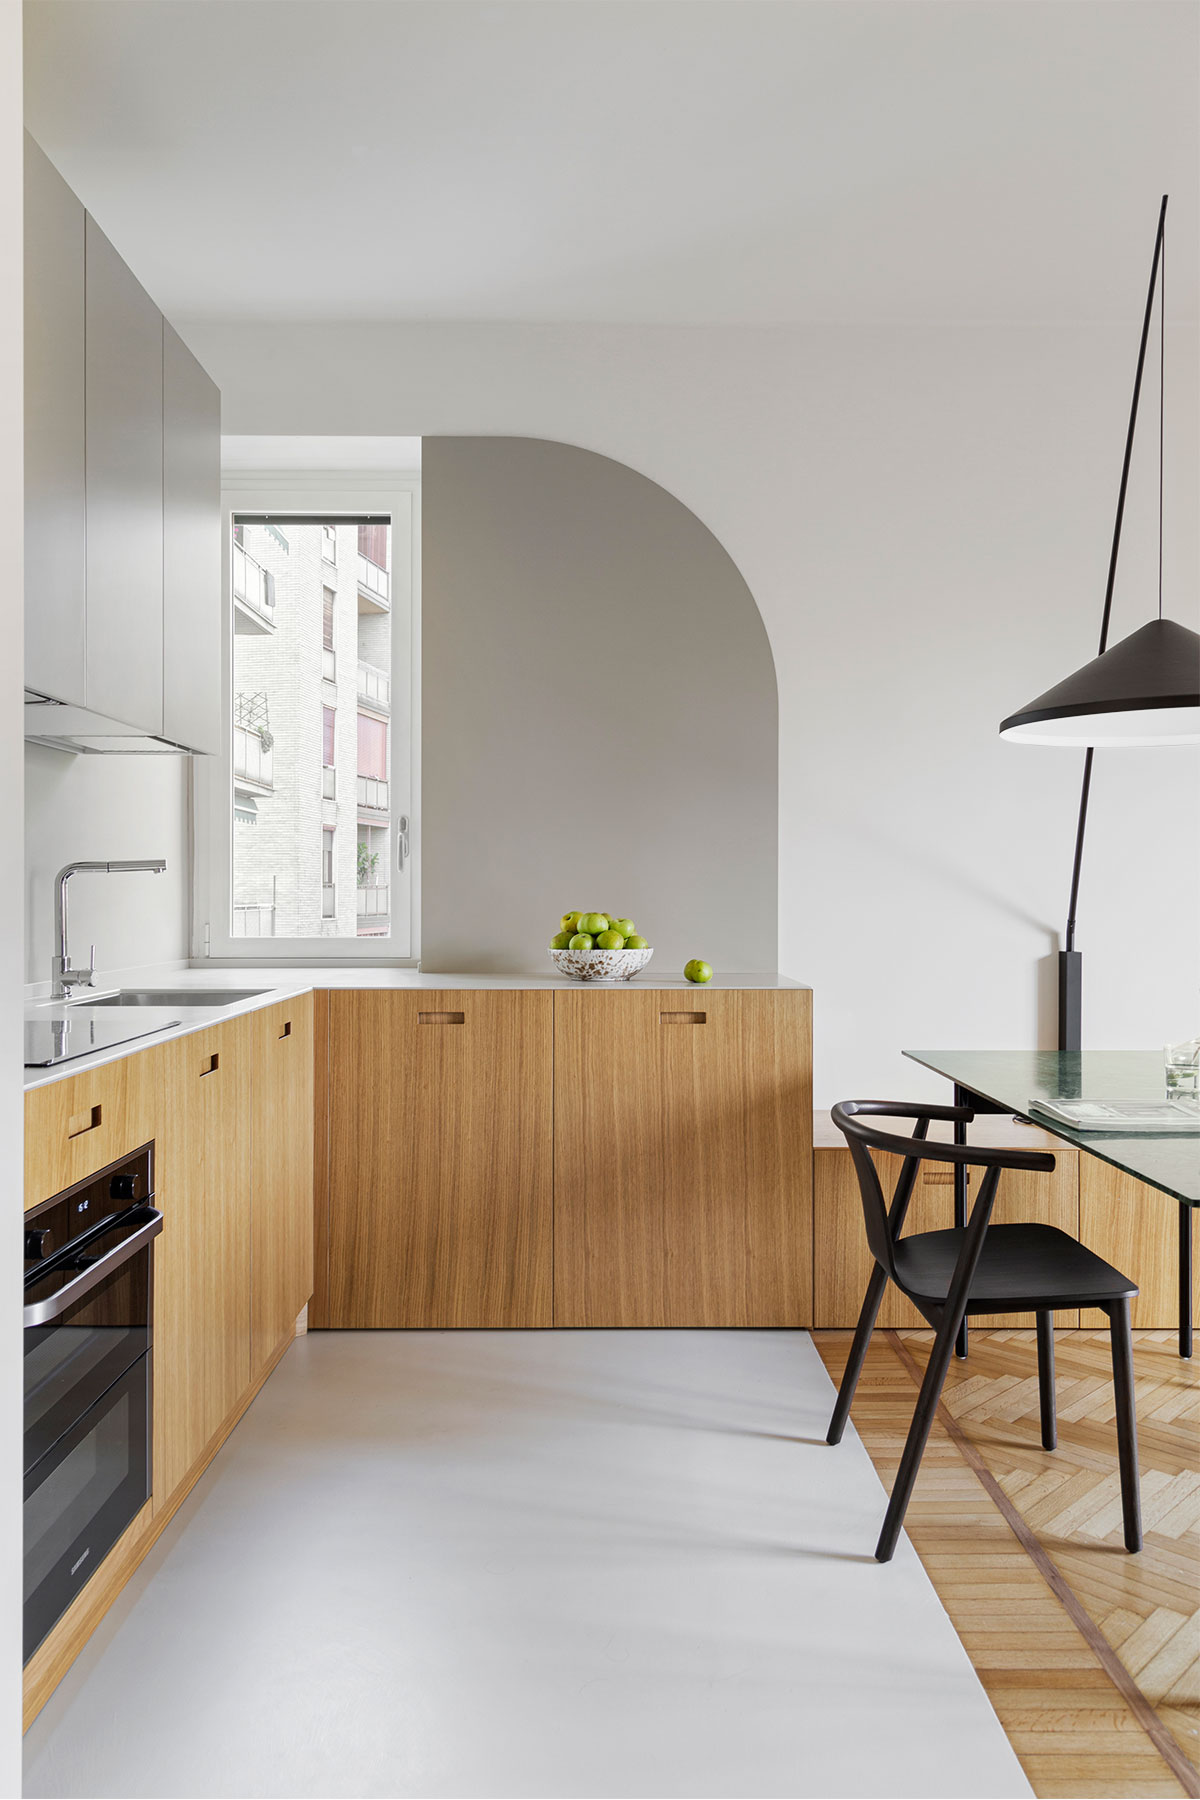 Vibia The Edit - A Renovated Milan Apartment North